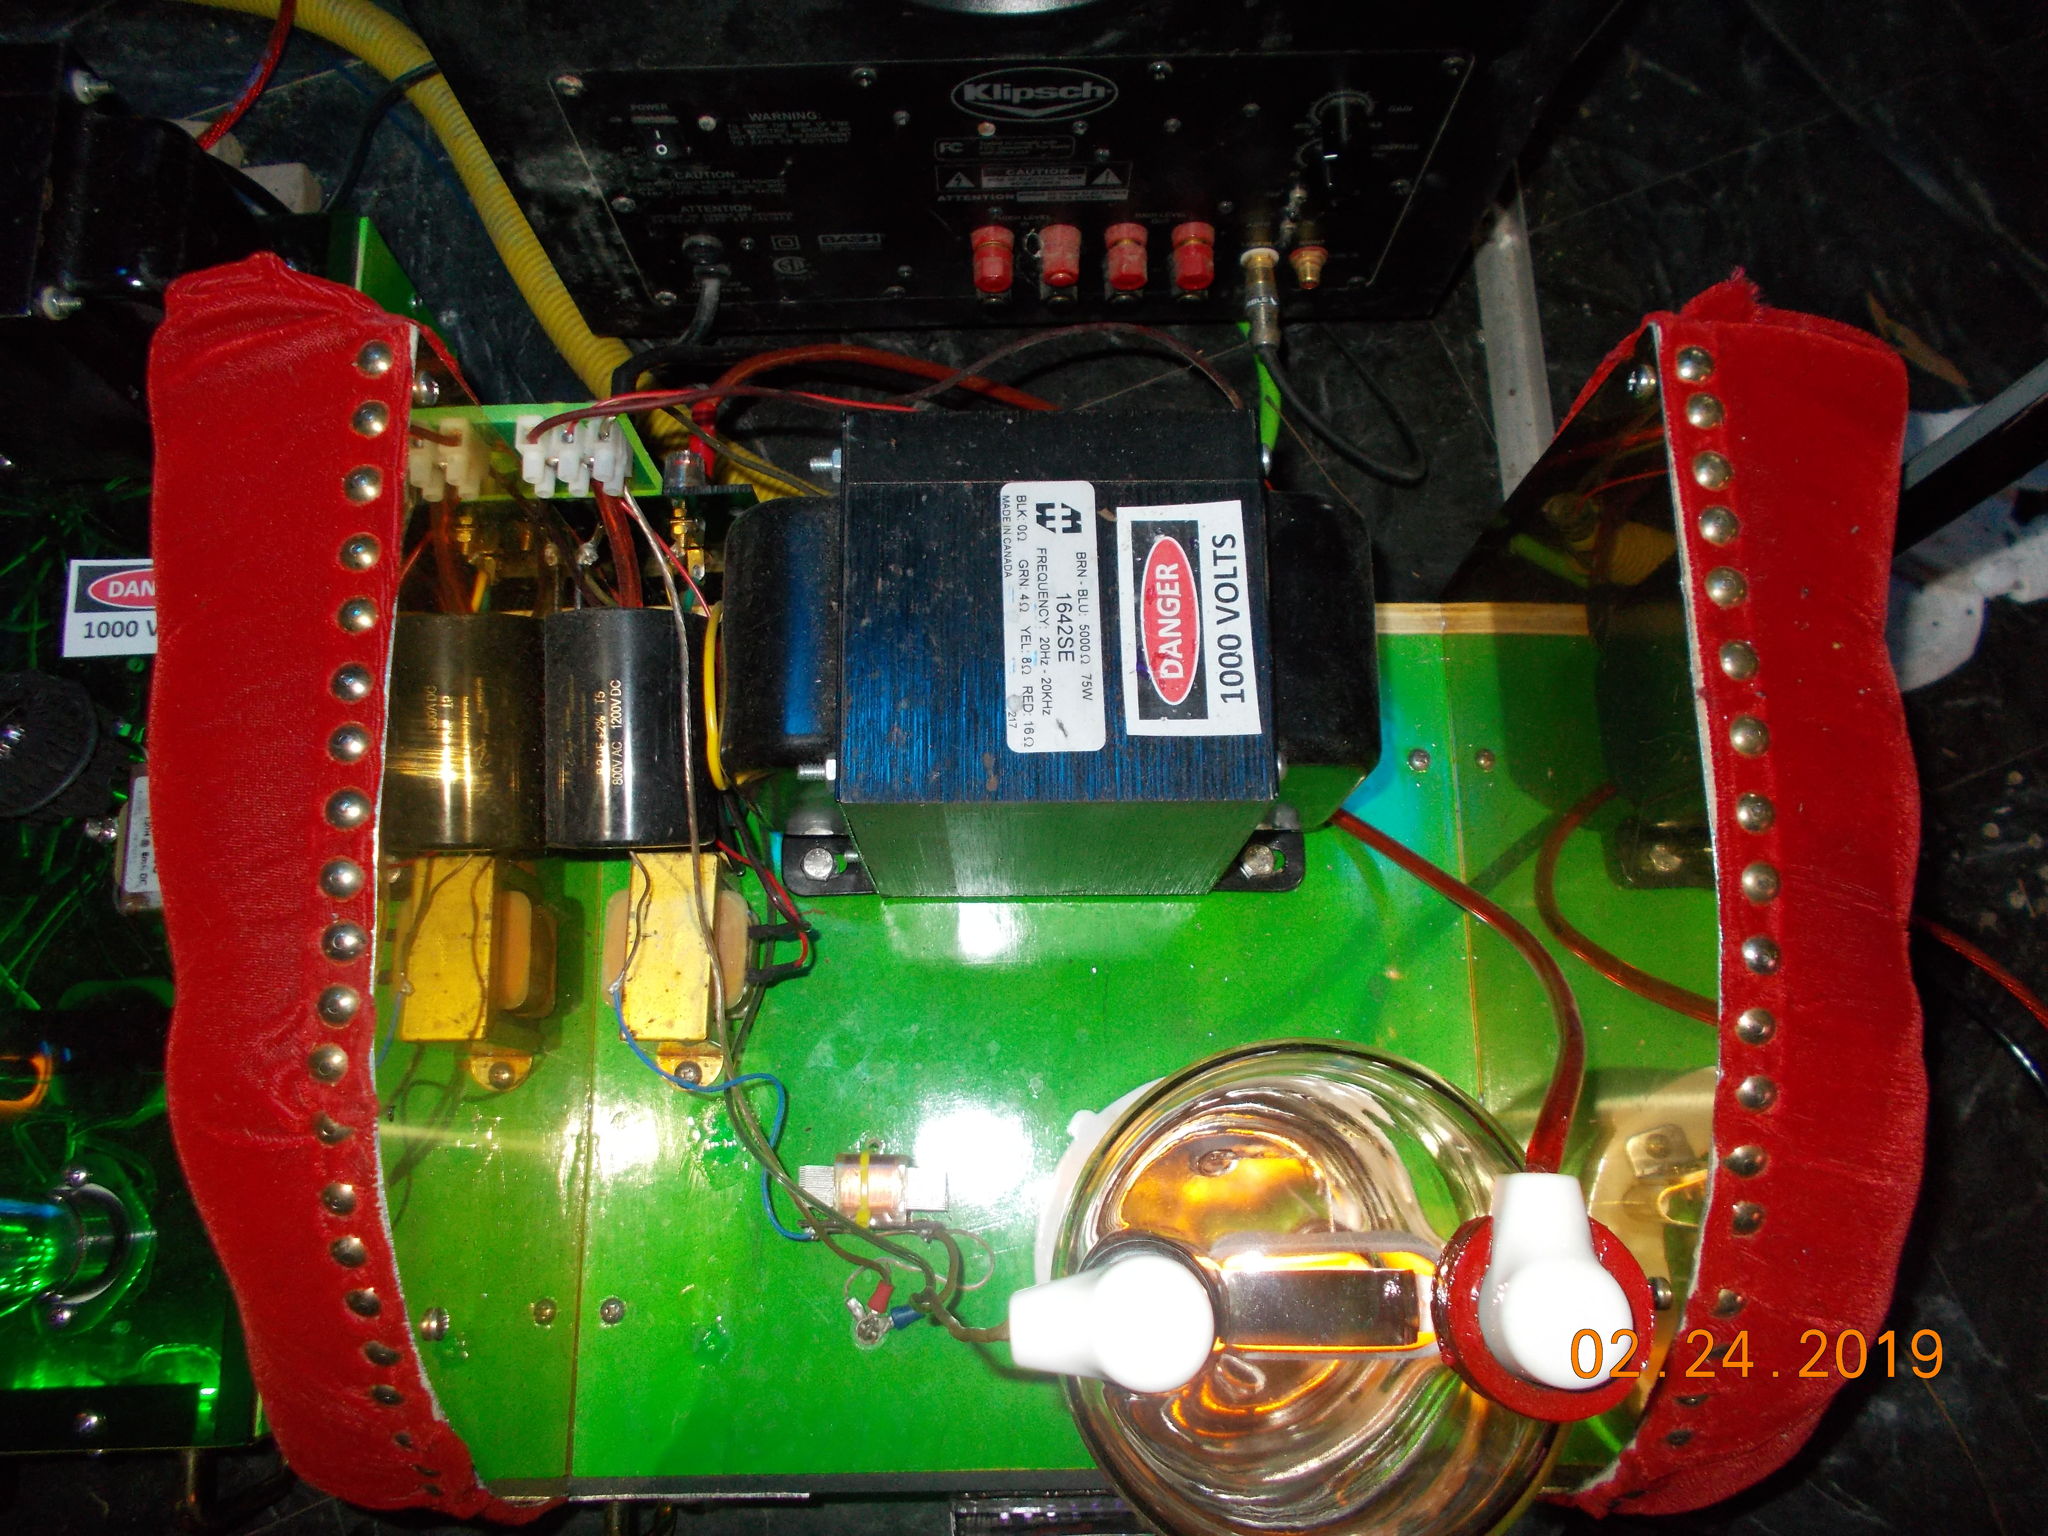 833-A stage before putting in the LL2765 coupling transformer